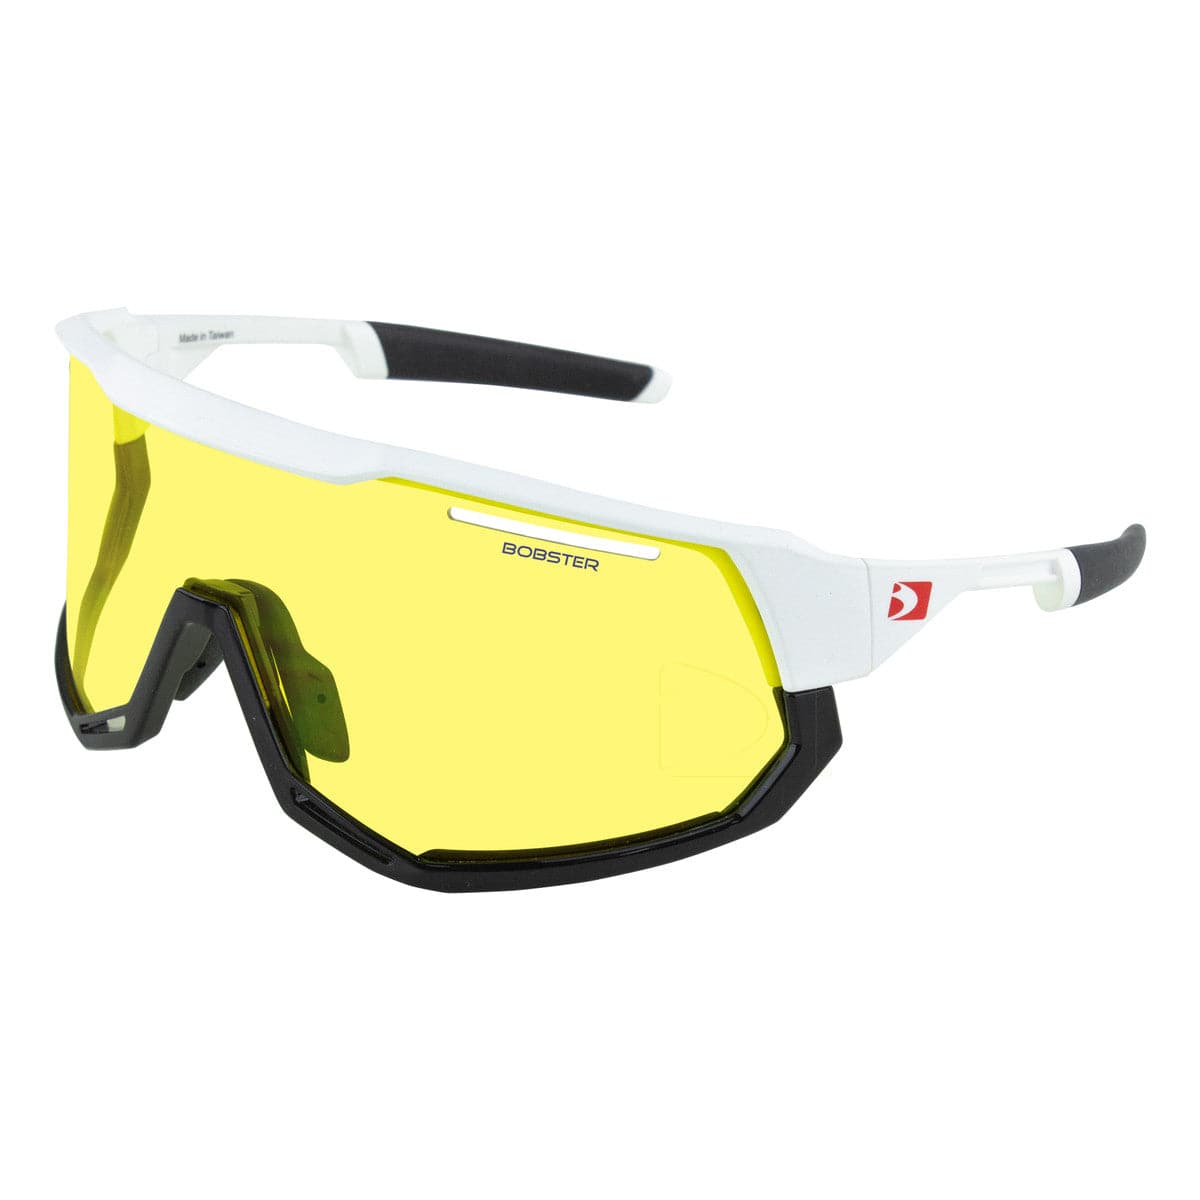 Bobster Freewheel Cycling Sunglasses shown with Yellow lens installed